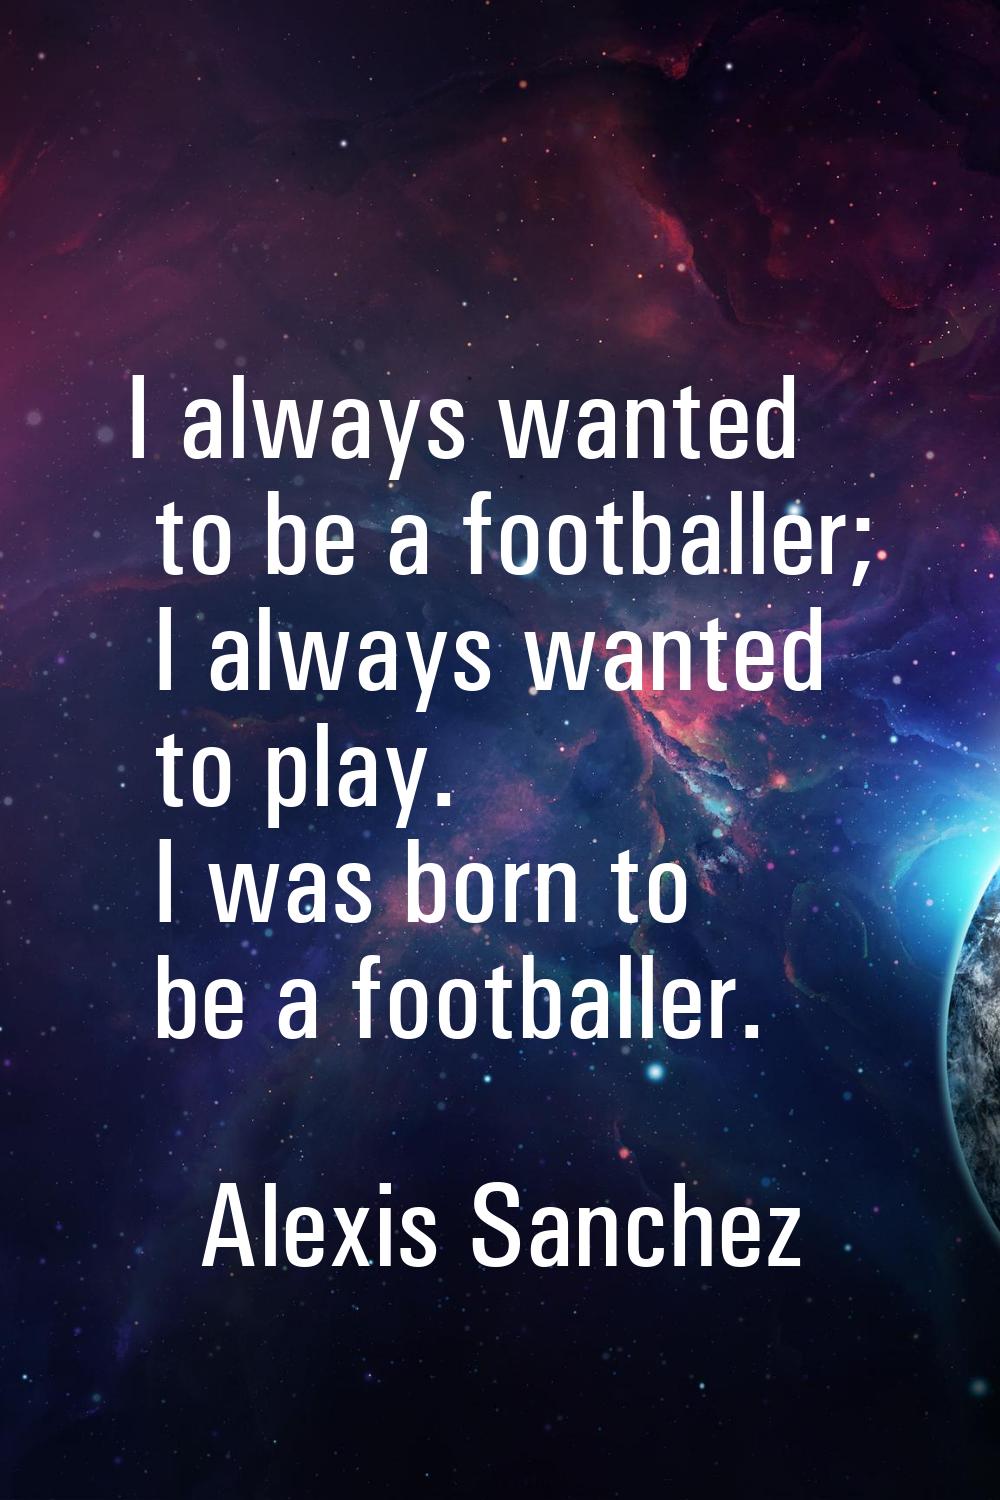 I always wanted to be a footballer; I always wanted to play. I was born to be a footballer.